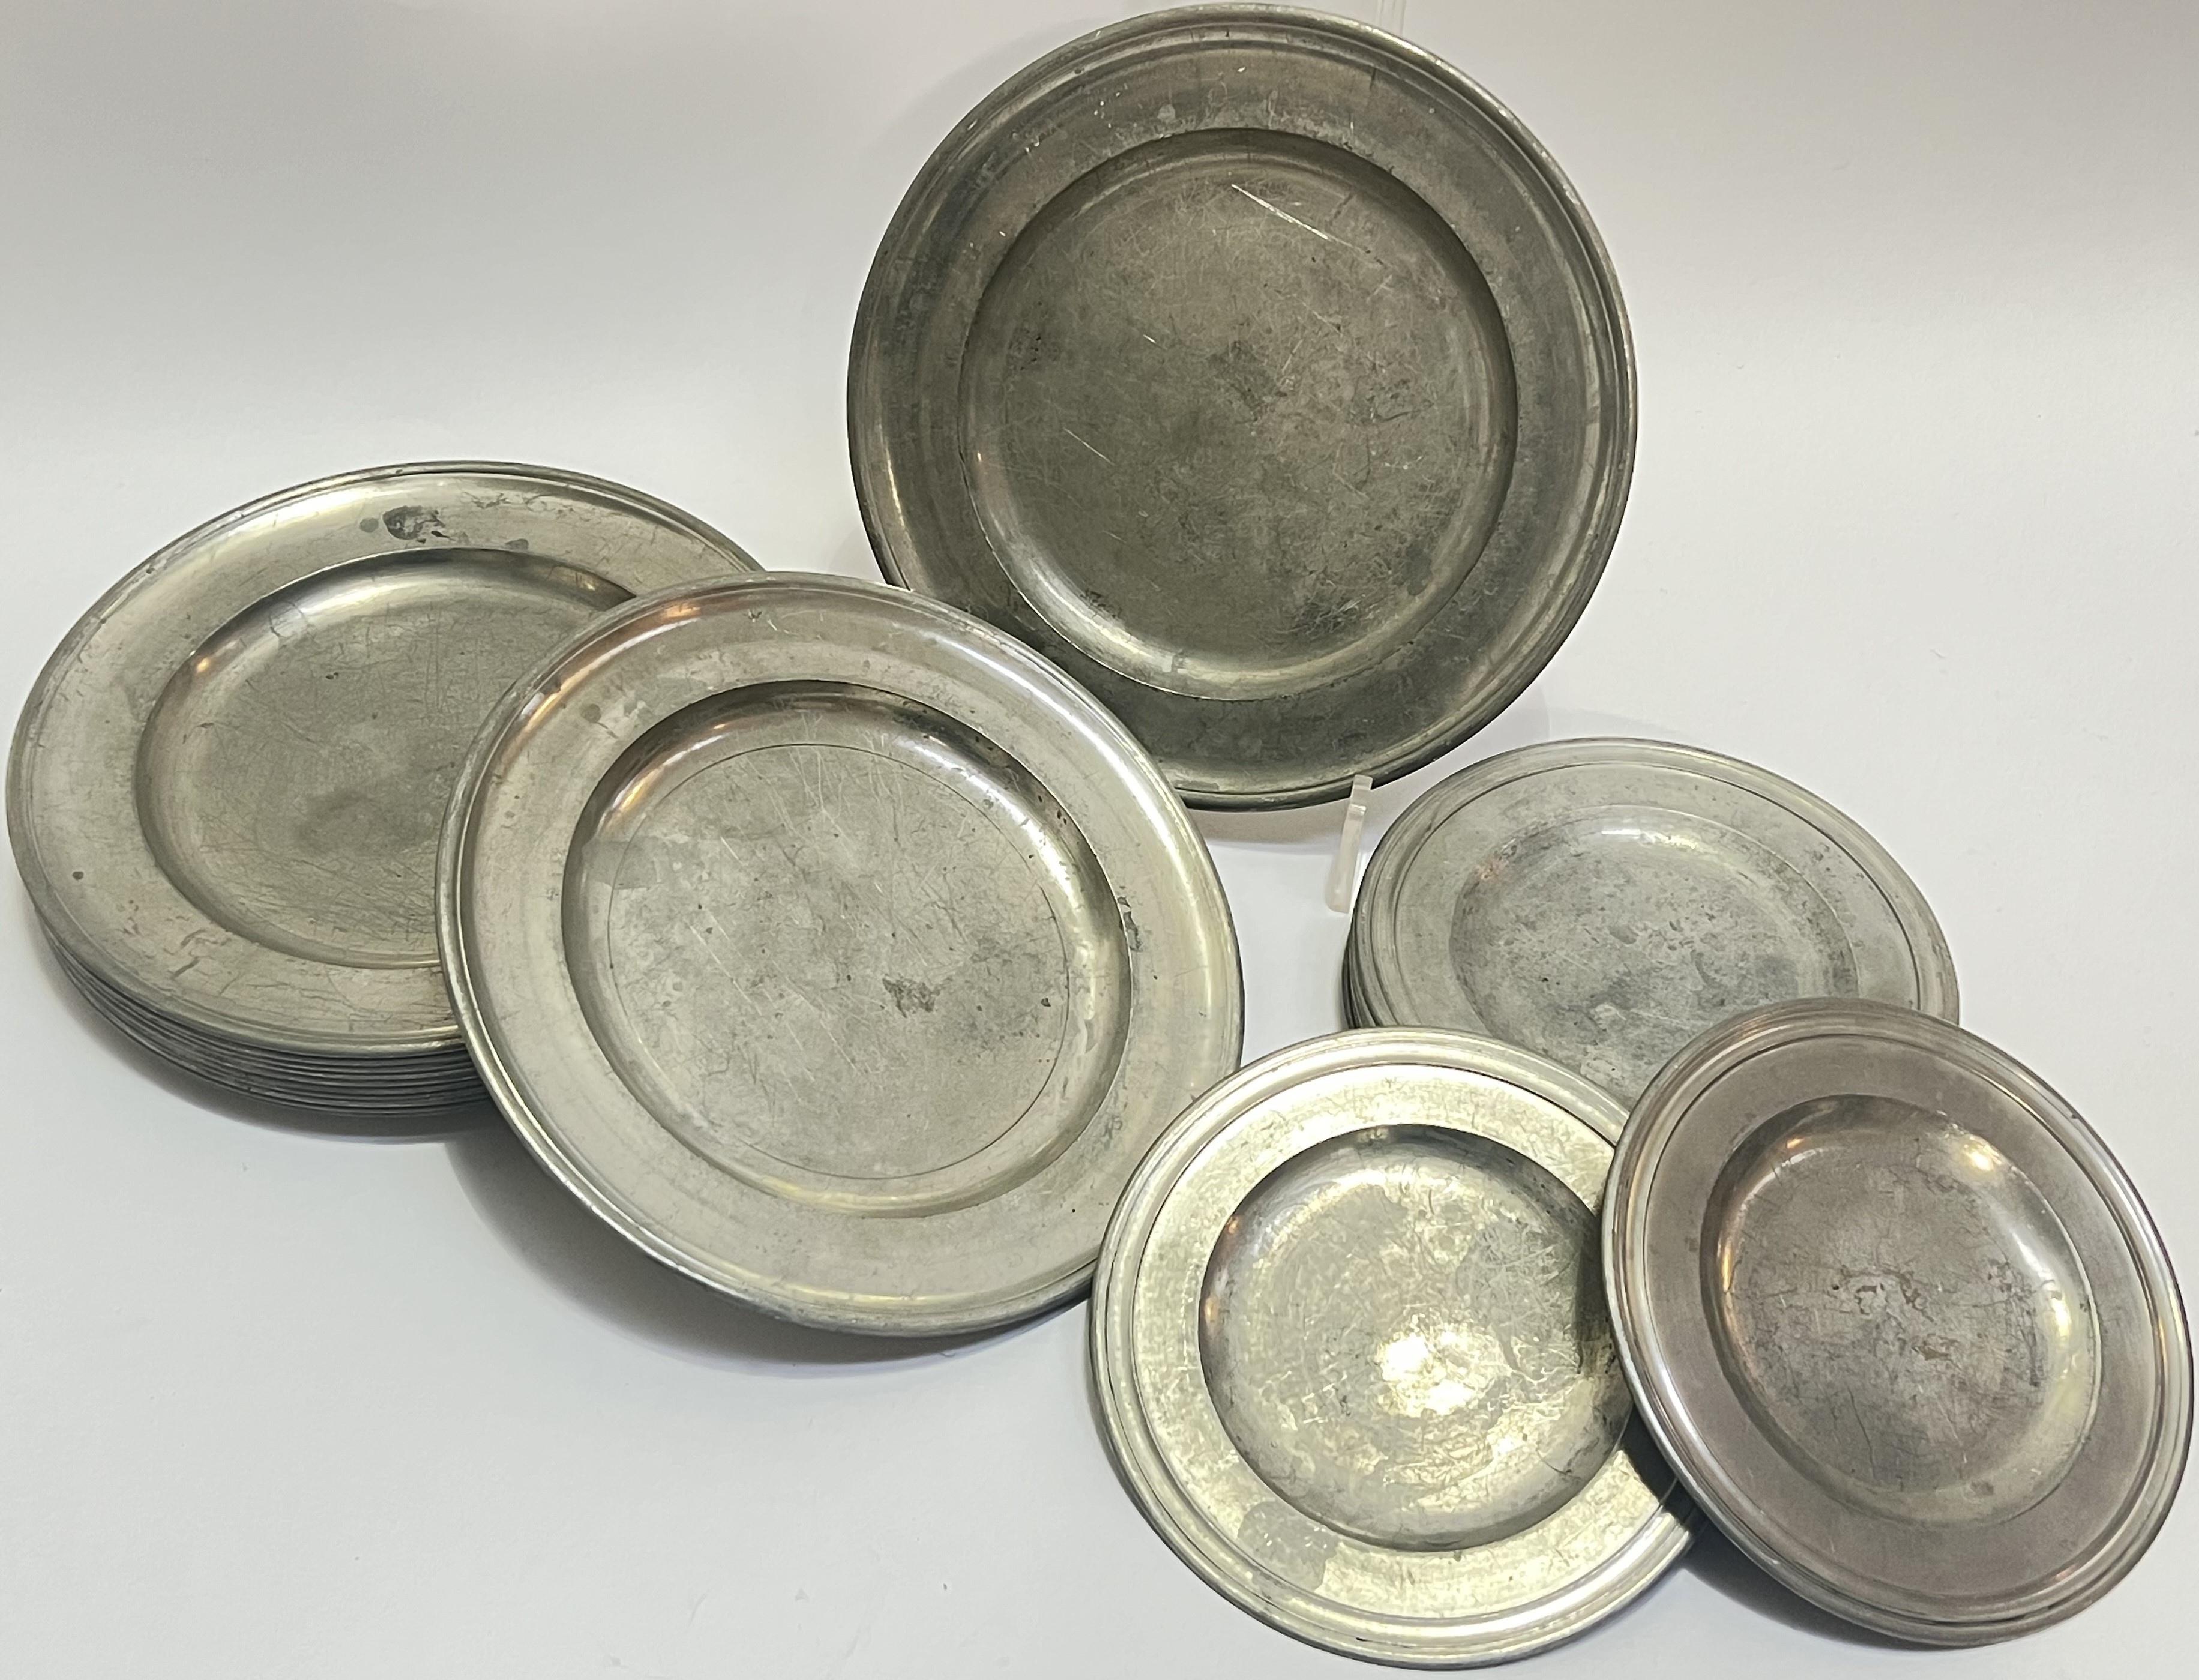 A group of twelve pewter plates (w- 24cm), marked Brasil verso, together with another twelve